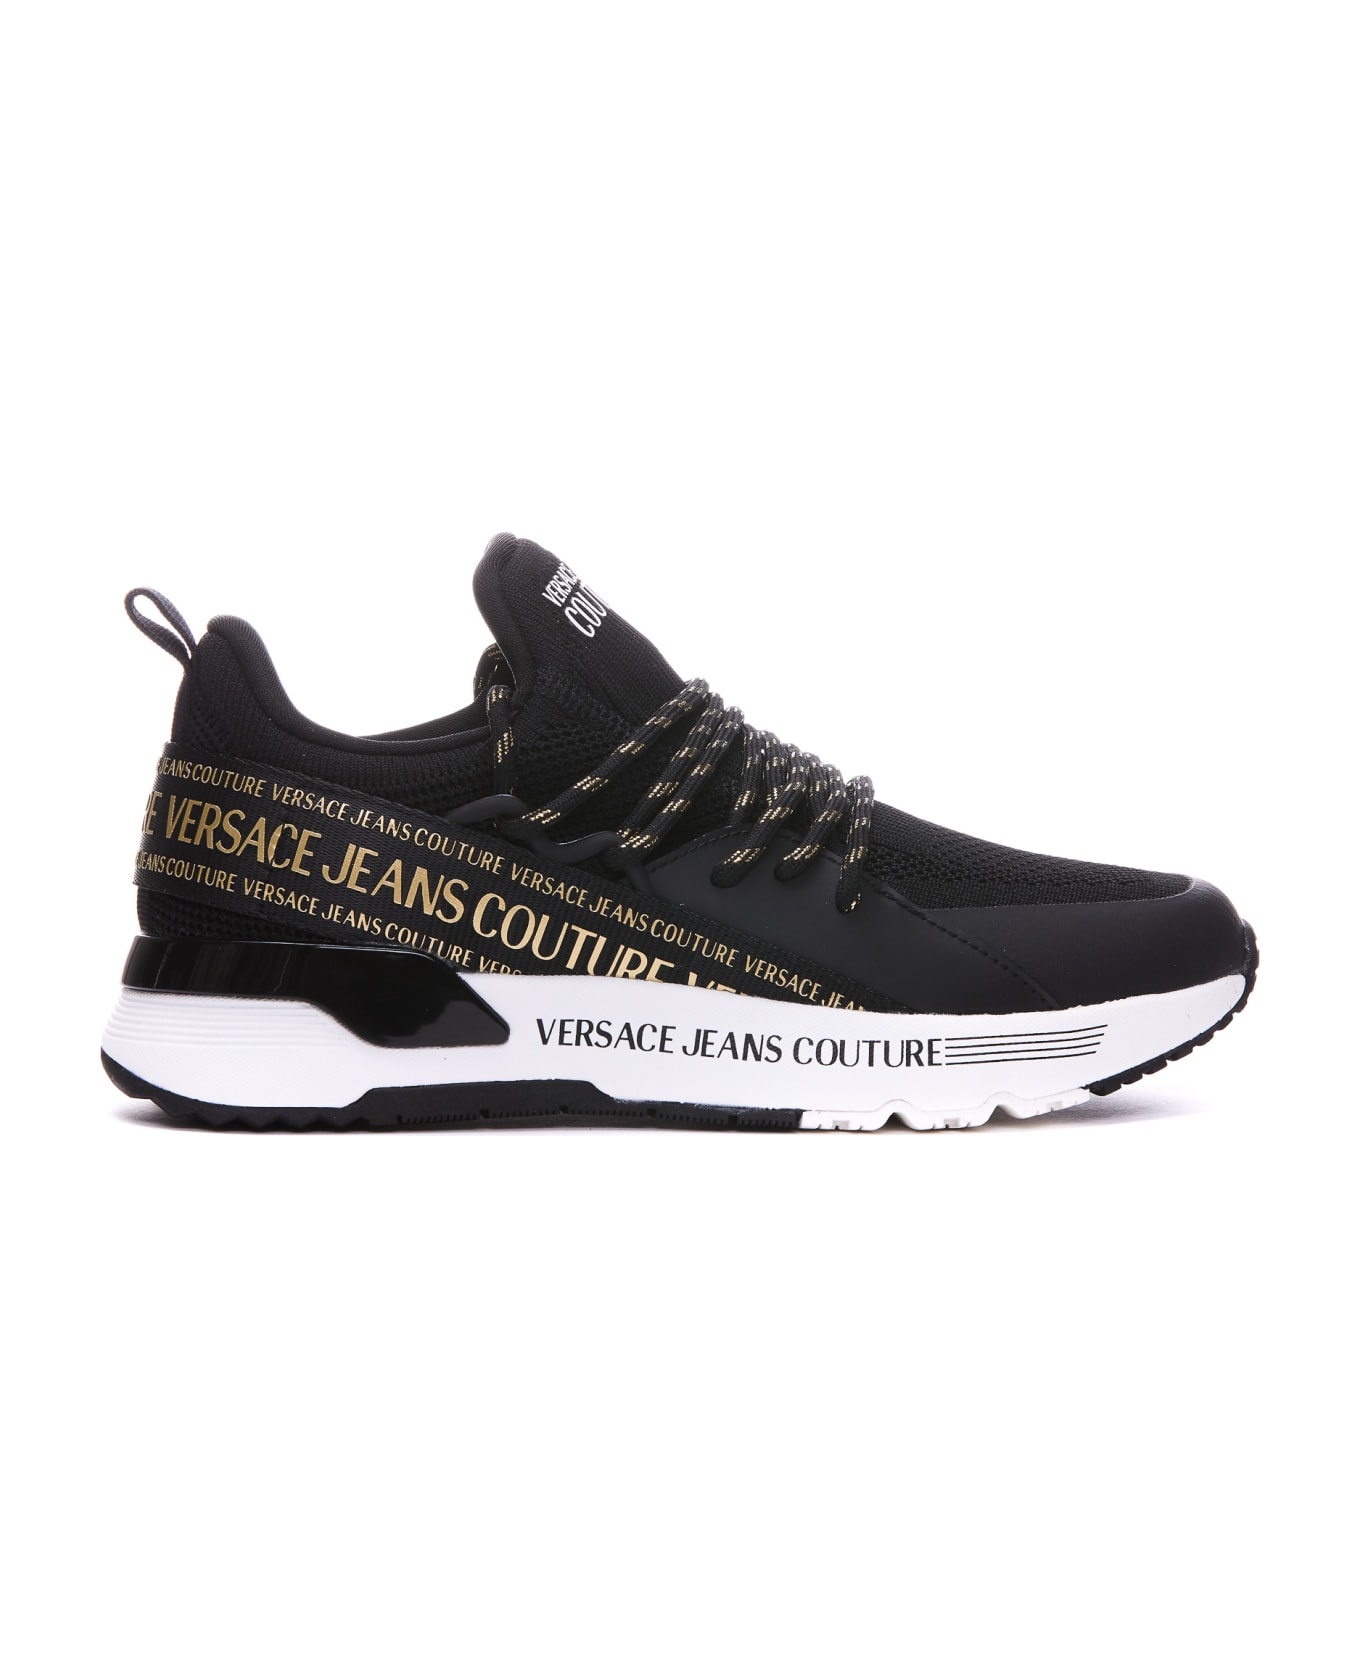 Versace Jeans Couture Dynamic Sneakers - BLACK/GOLD スニーカー